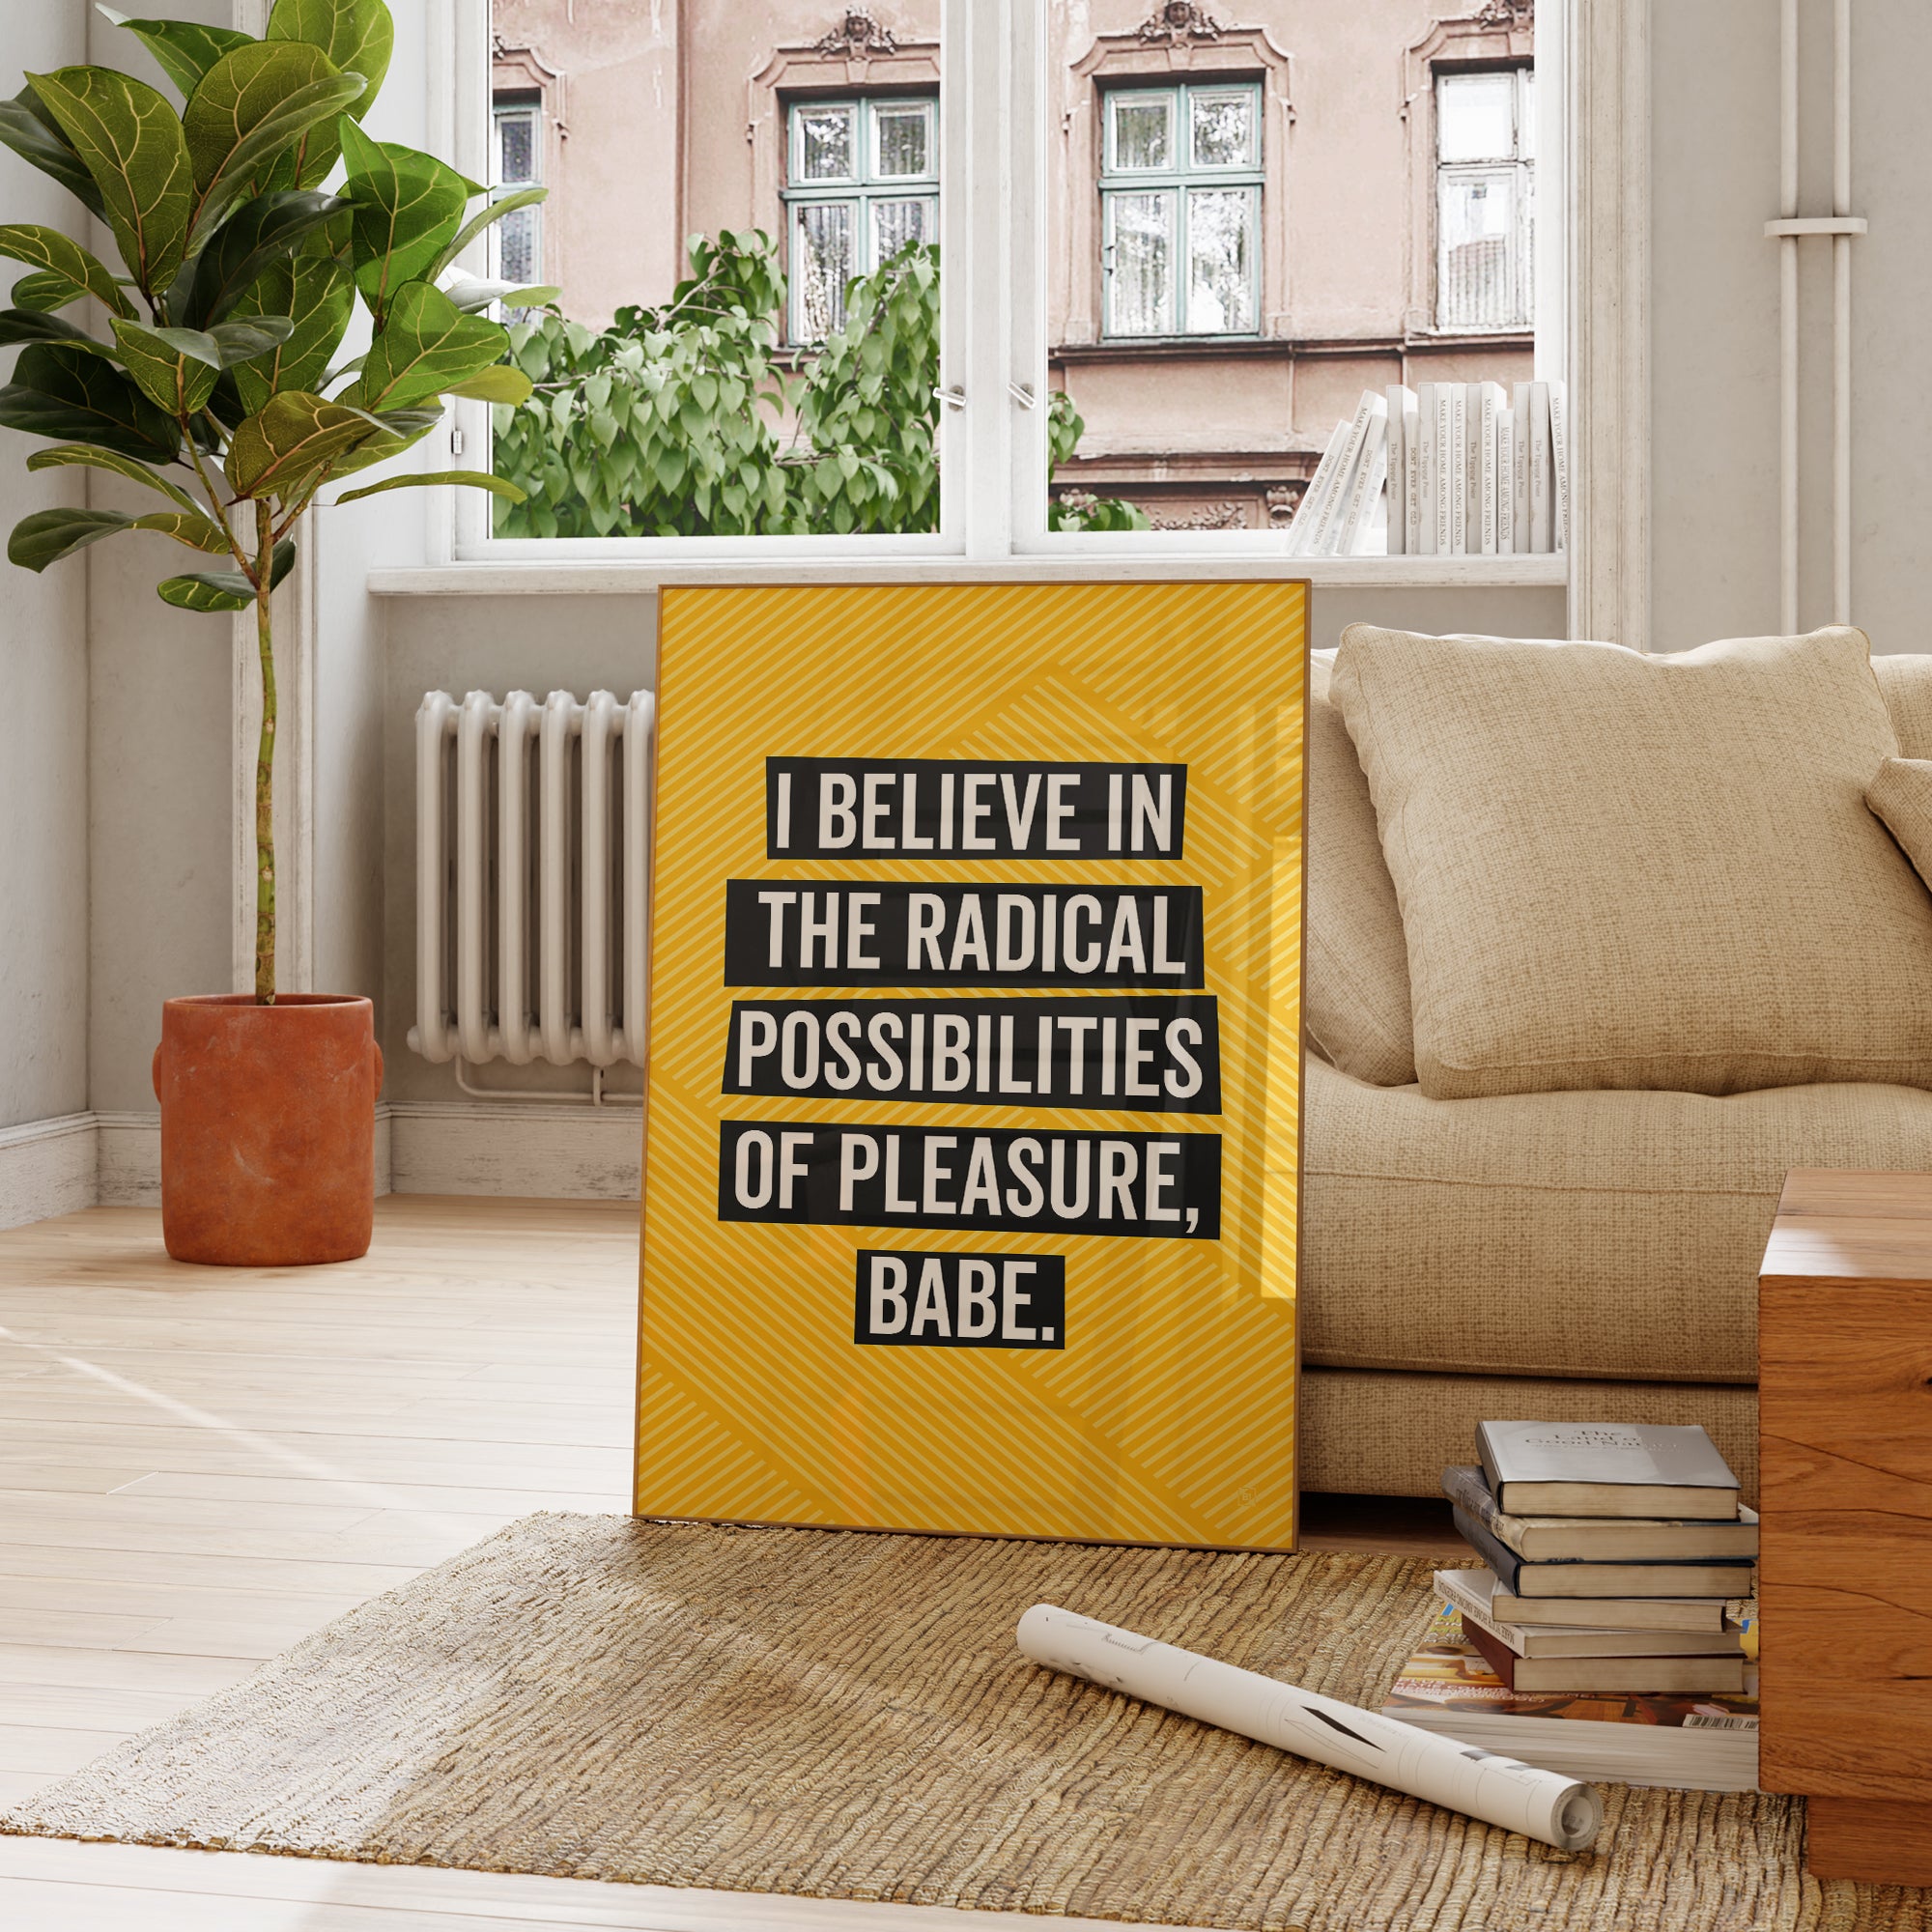 Be inspired by our golden yellow Bikini Kill "I Believe in the Radical Possibilities of Pleasure Babe" lyrics art print! This artwork was printed using the giclée process on archival acid-free paper and is showcased in a French living room, capturing its timeless beauty in every detail.